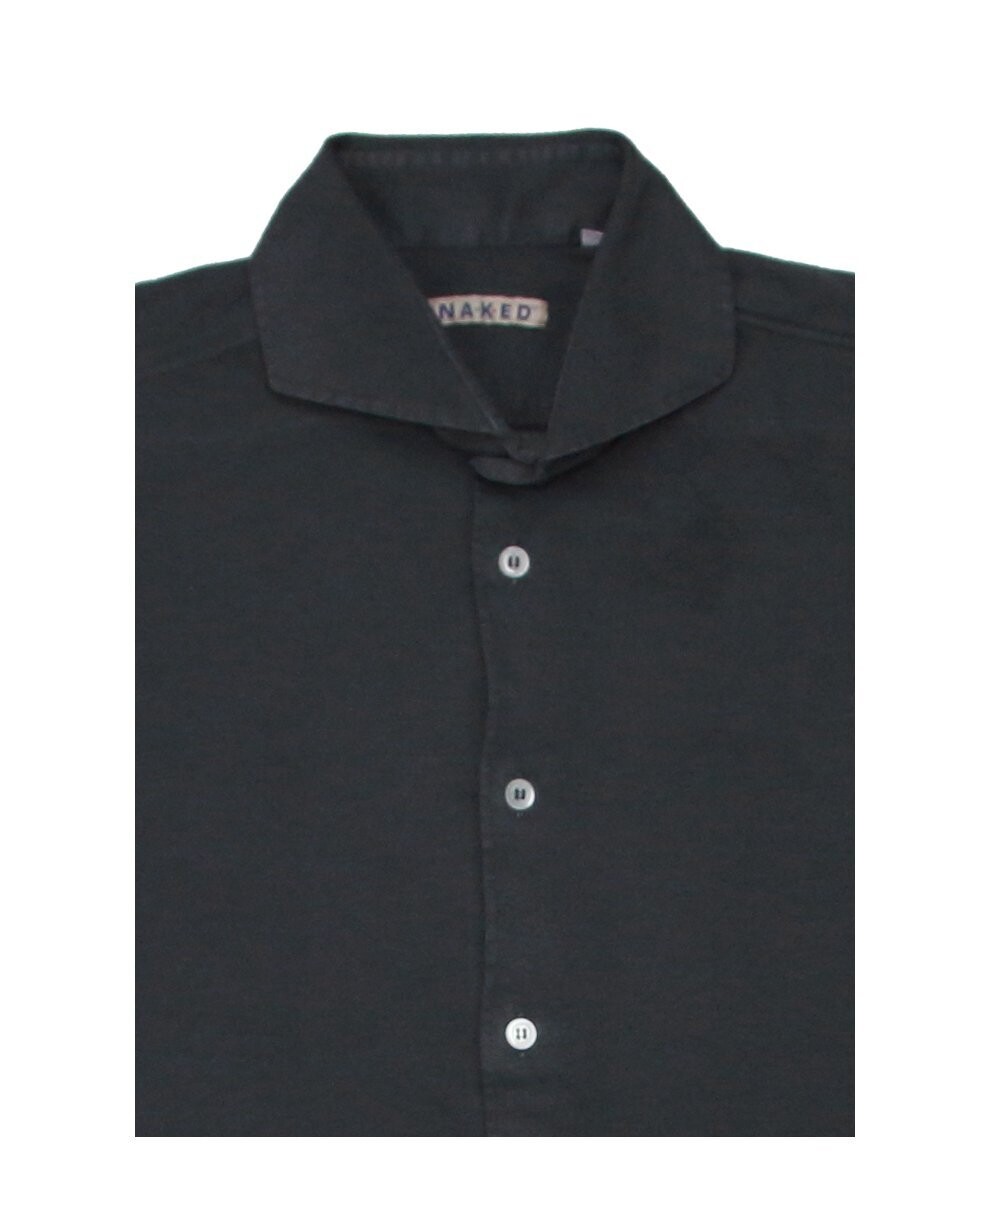 Shop Authentic Italian Men's Shirts and Polos Online